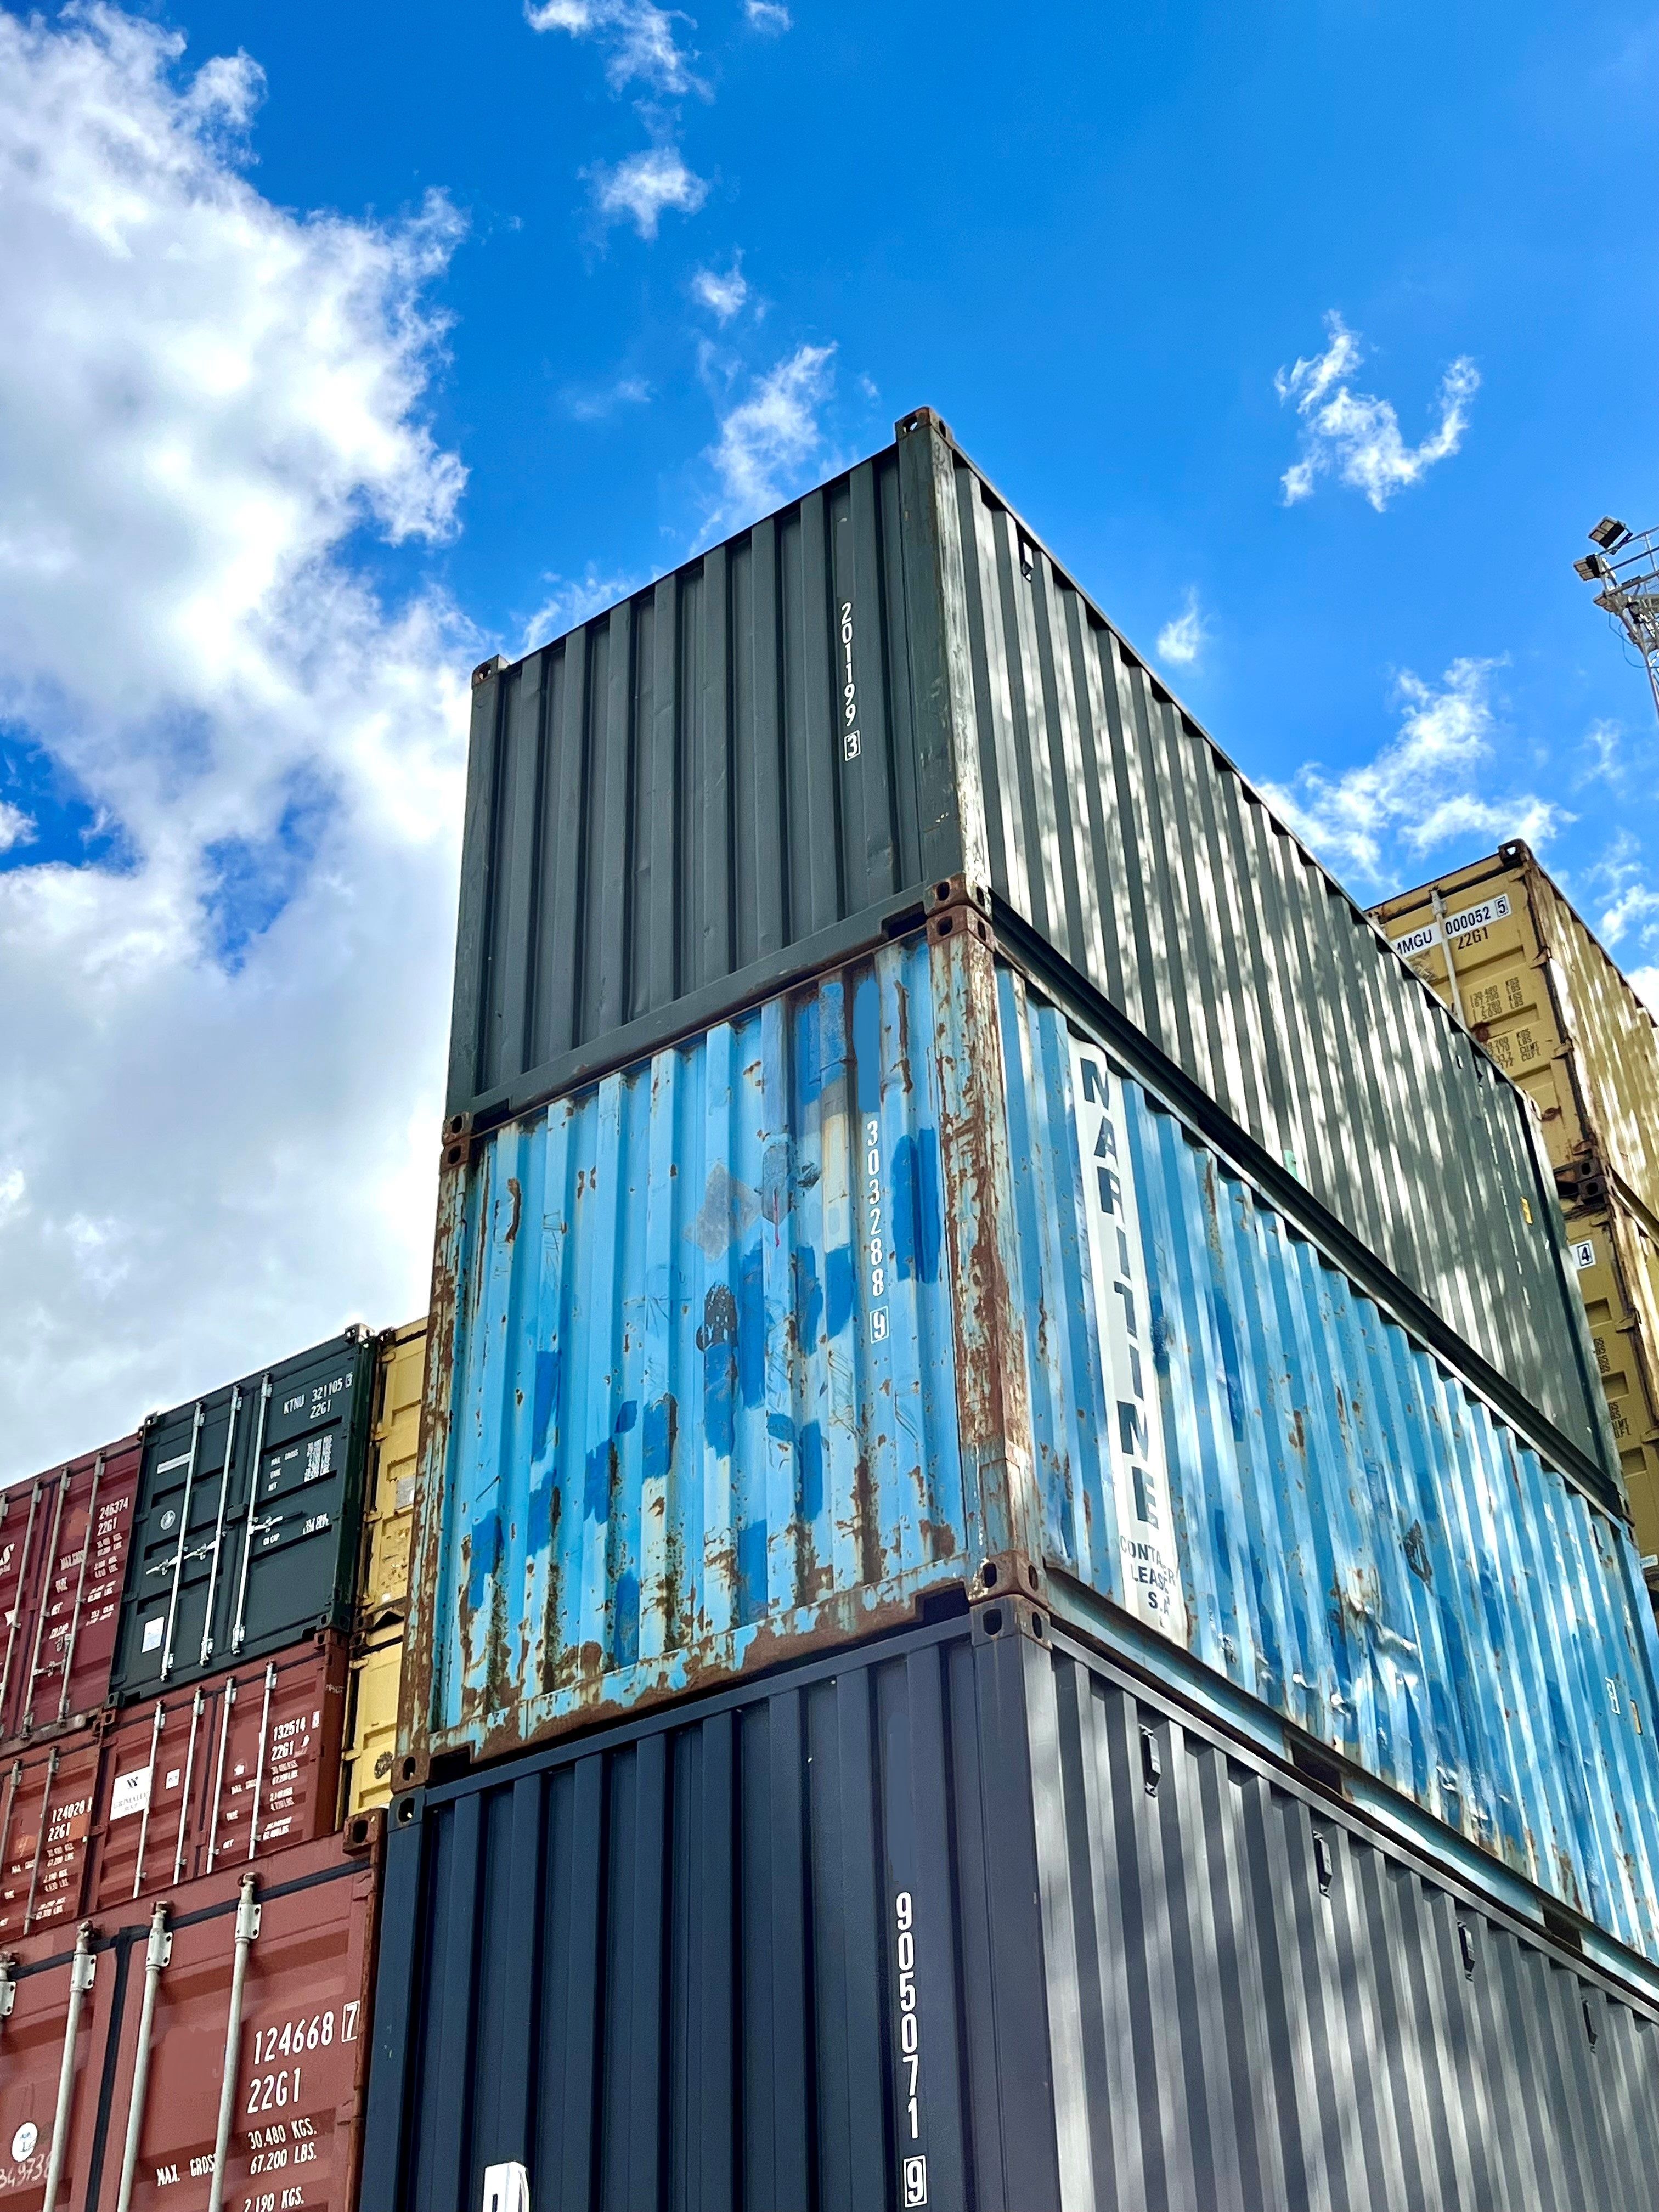 How to buy a shipping container online